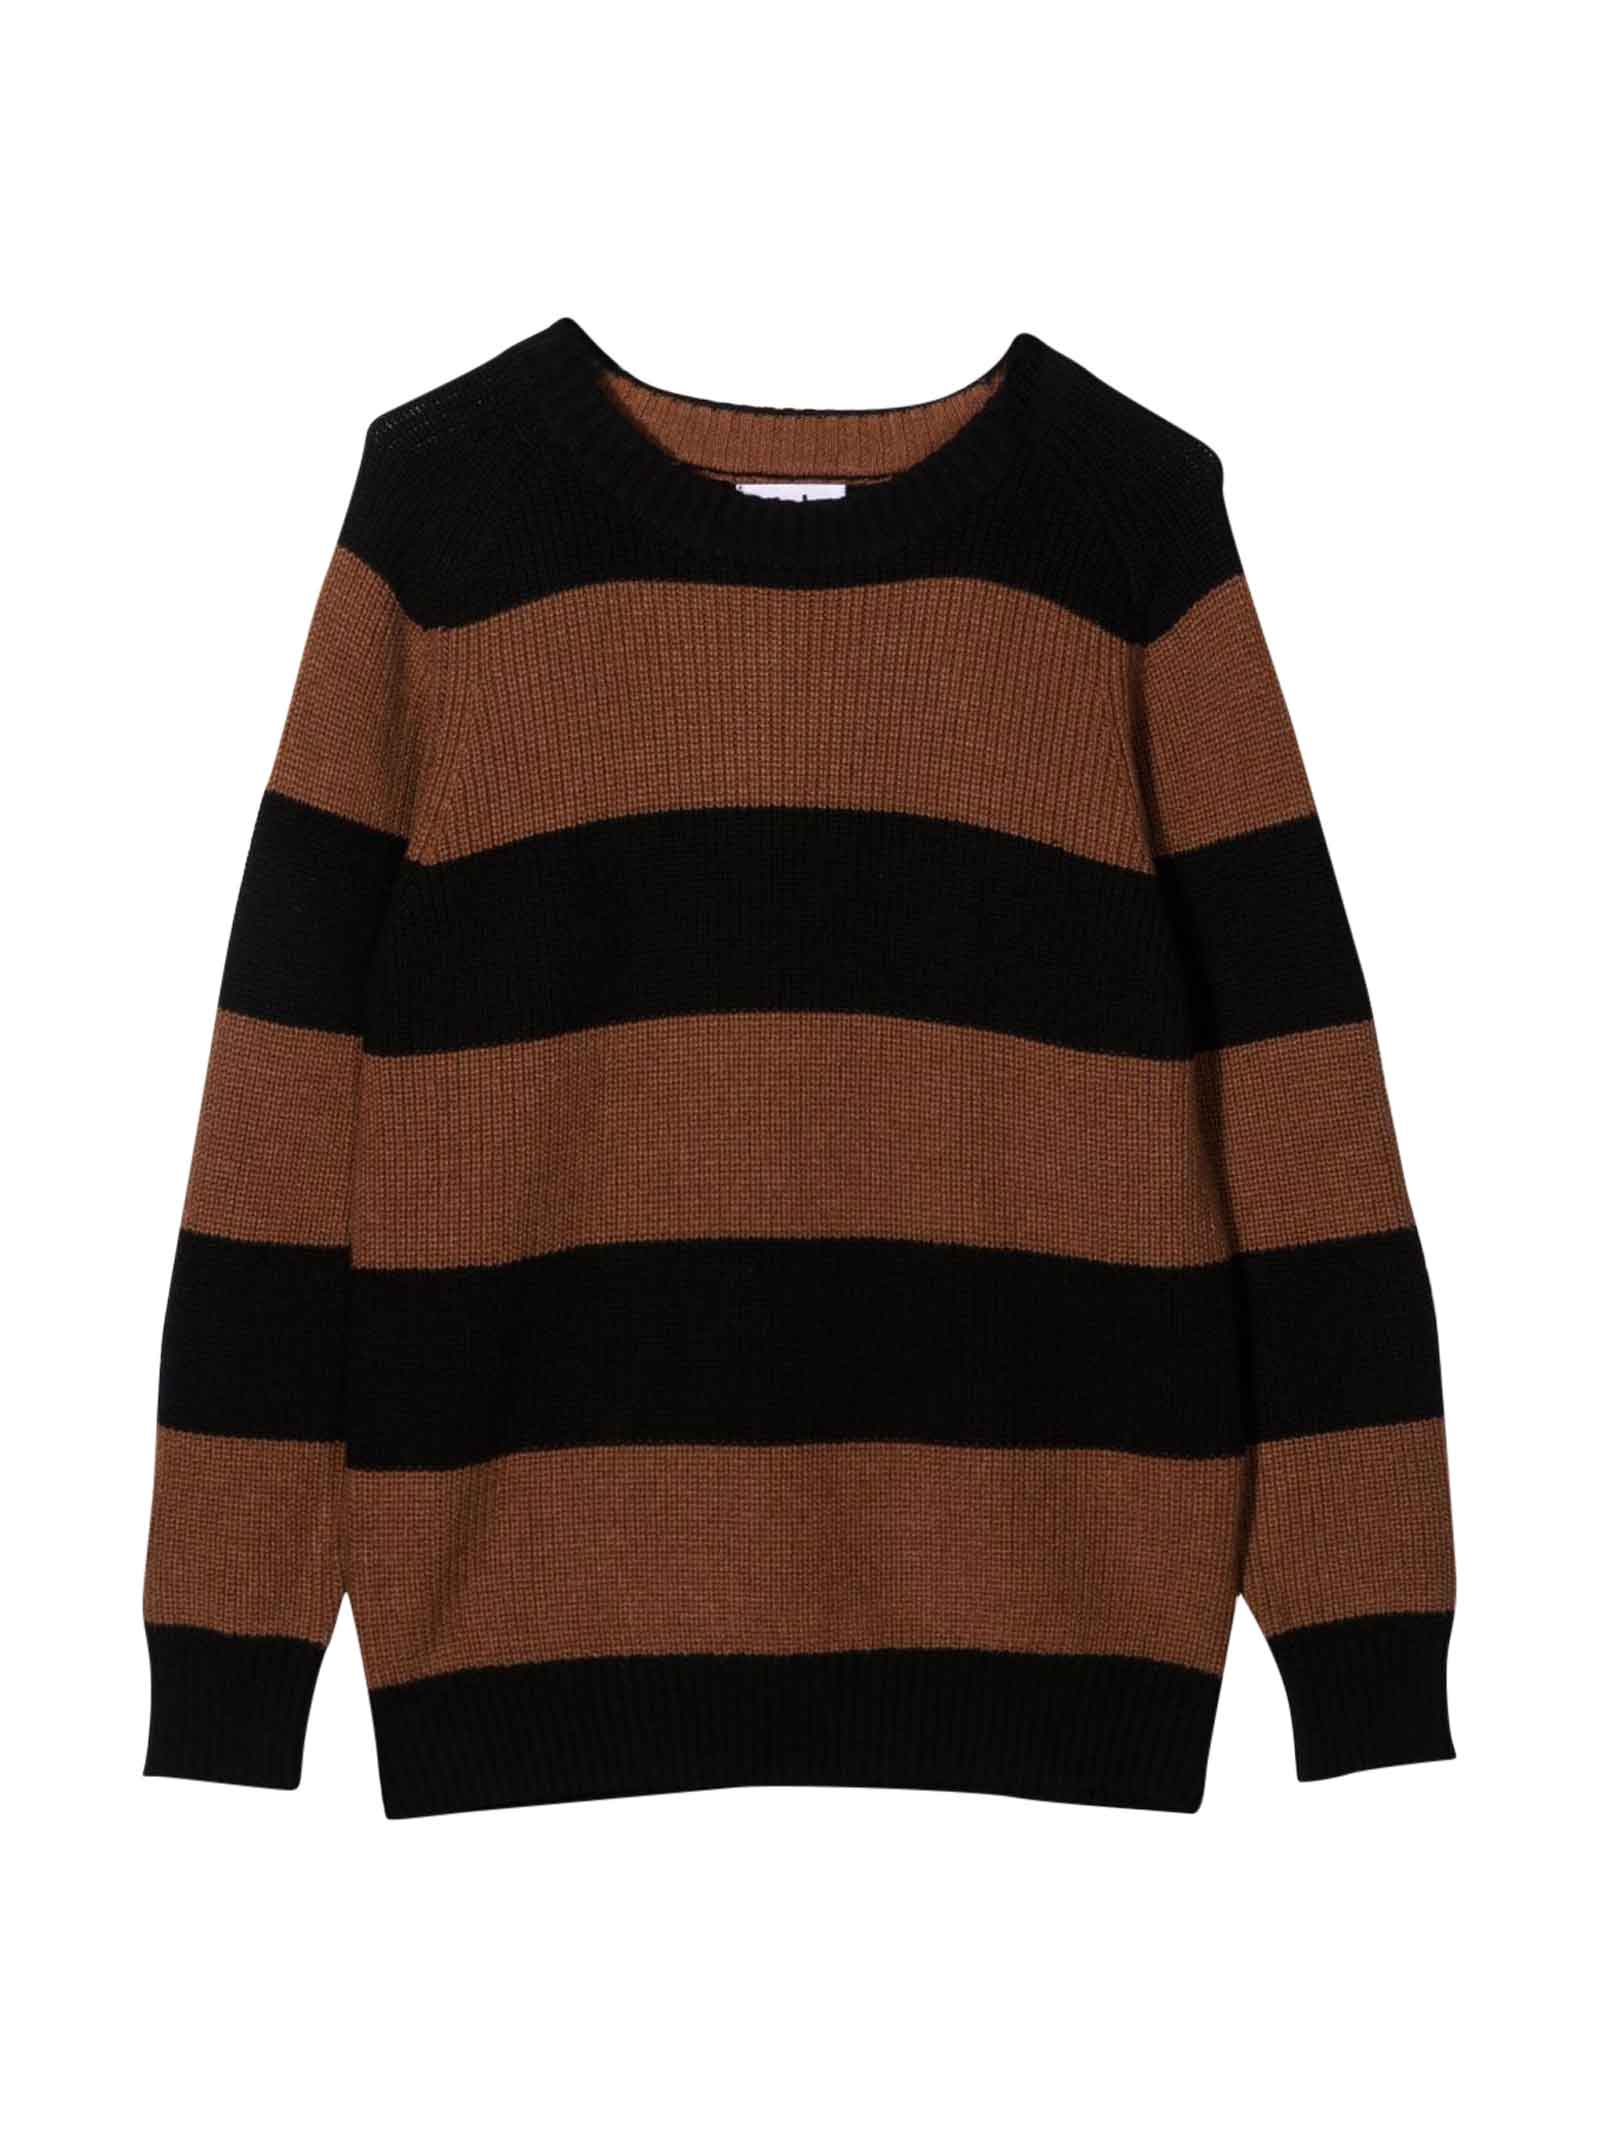 Molo Kids Black And Brown Striped Sweater